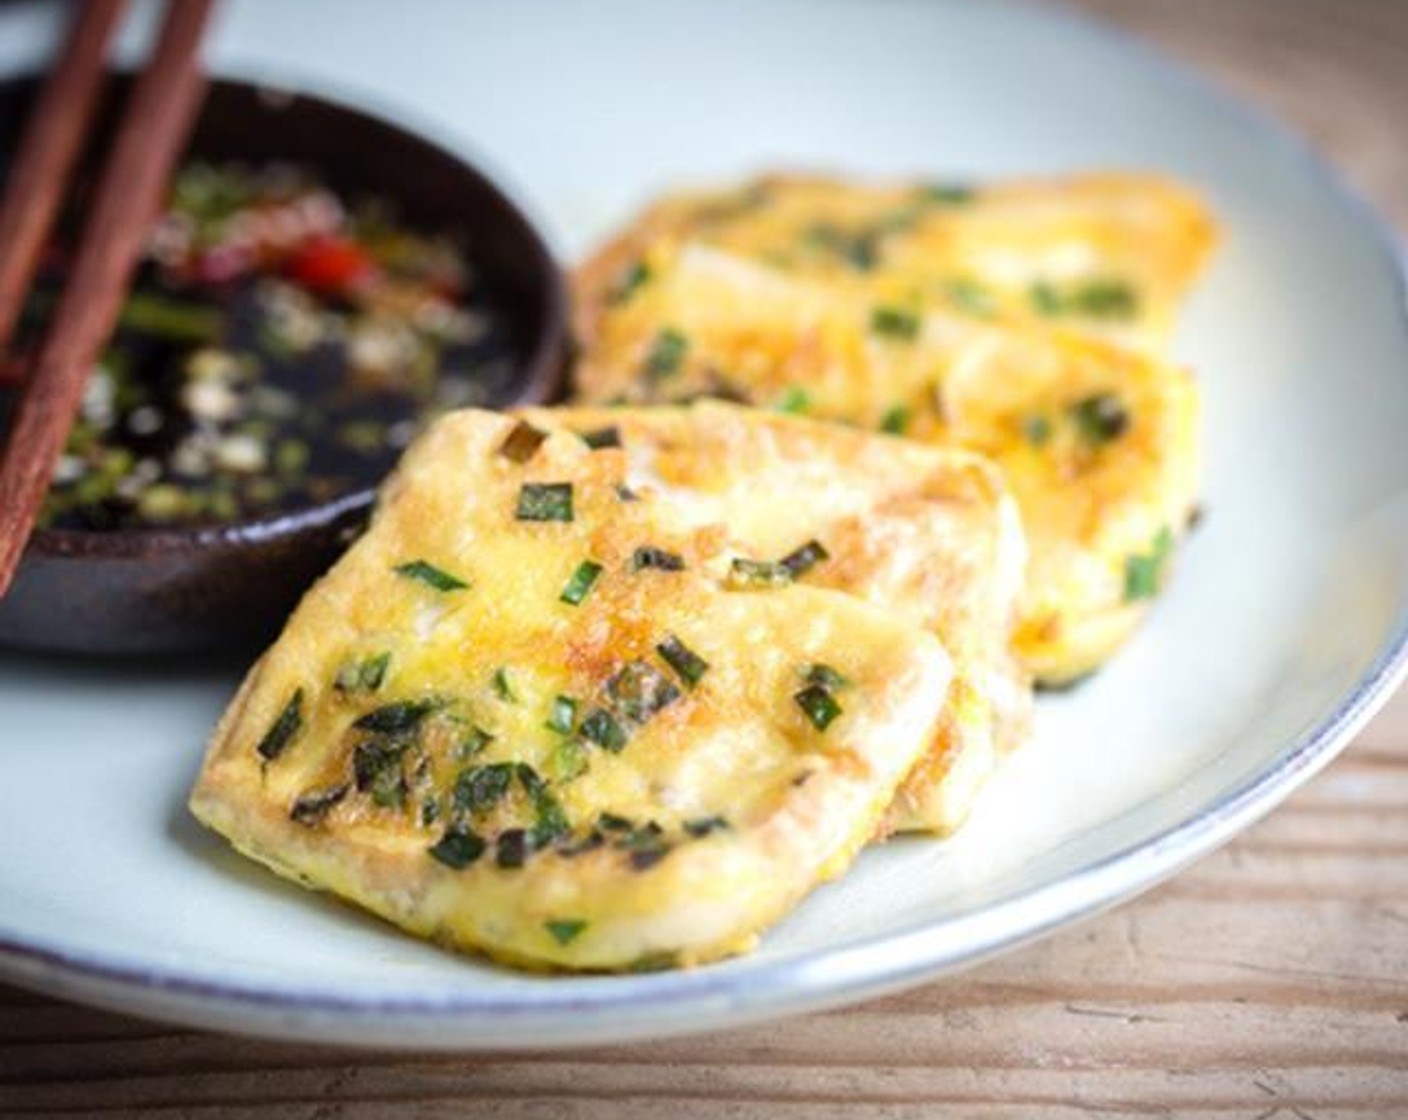 Pan-fried Tofu with Egg and Chive